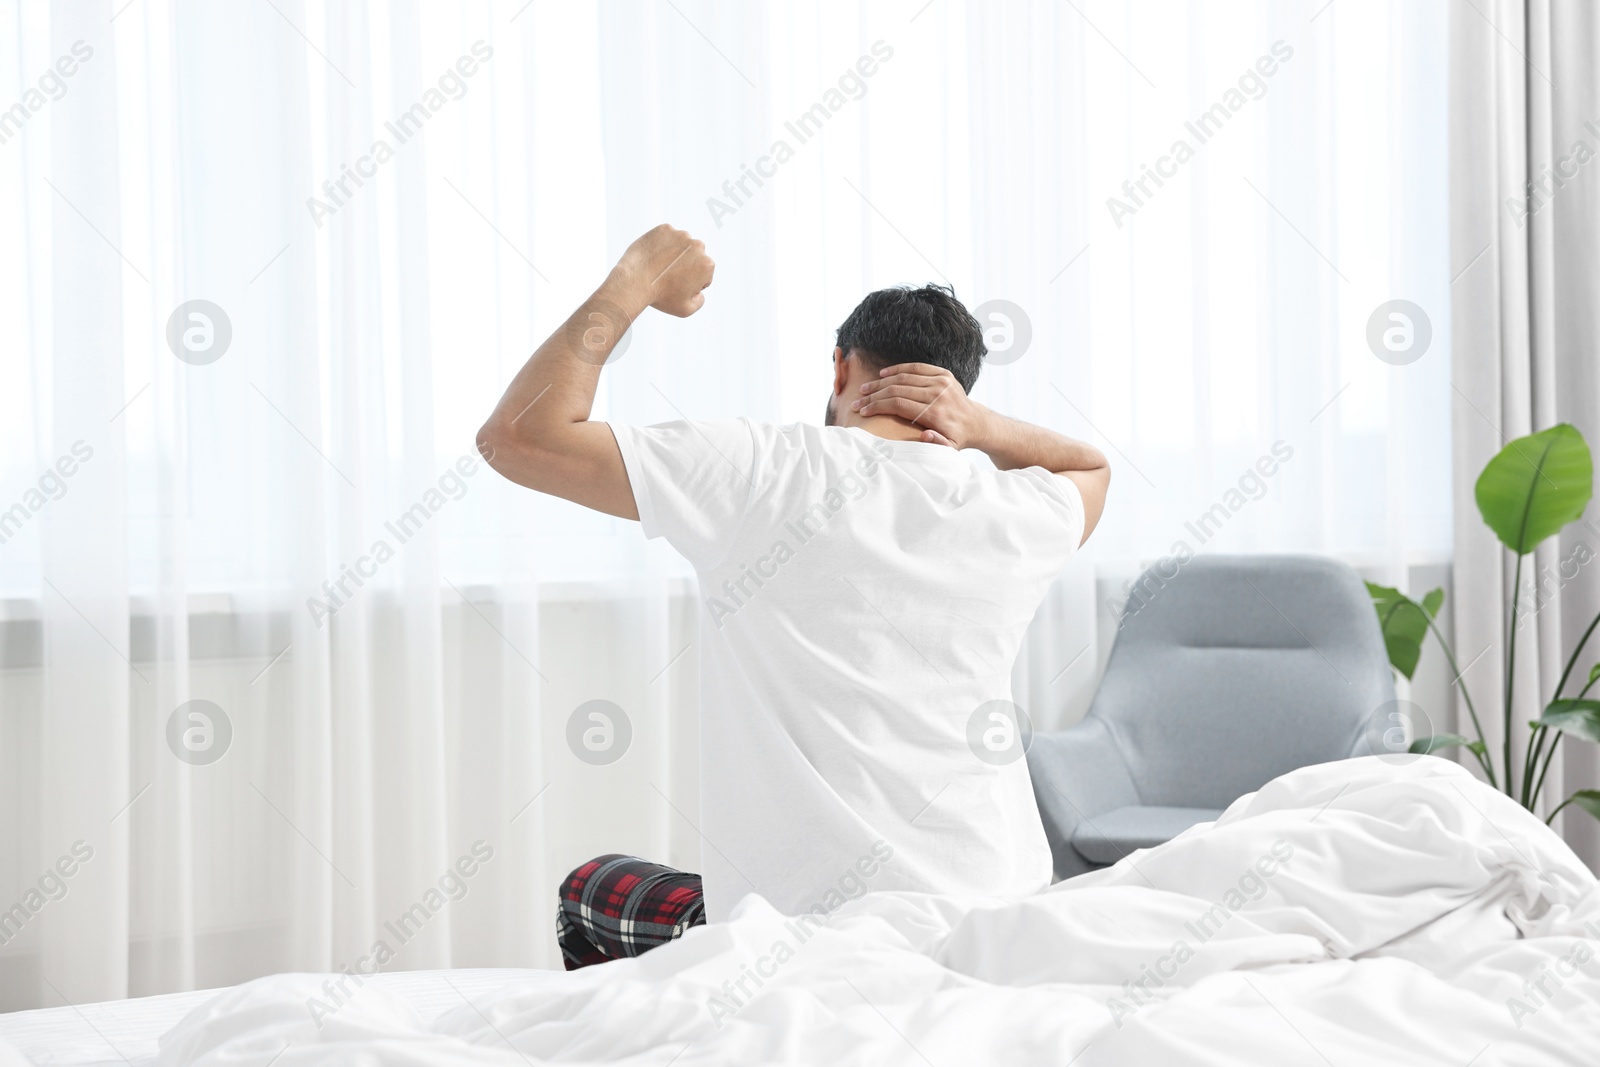 Photo of Morning of man stretching on bed at home, back view